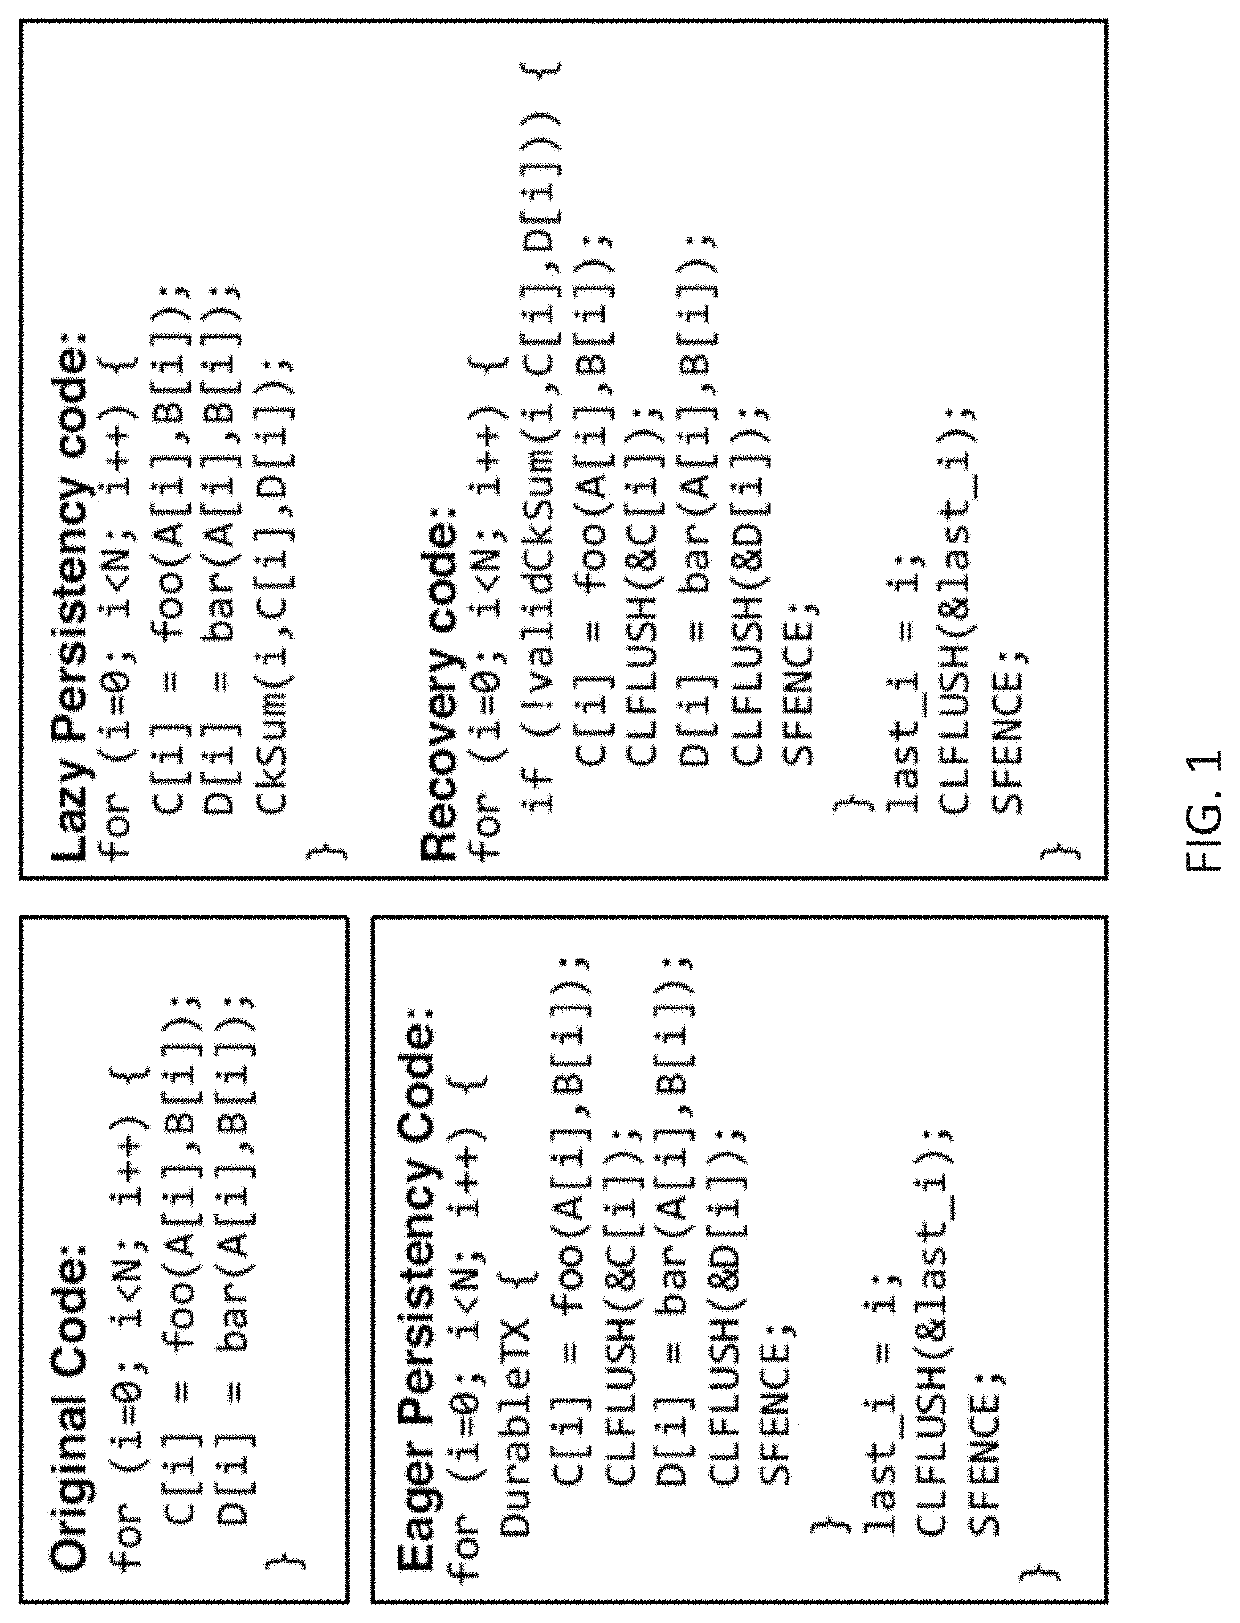 Methods of crash recovery for data stored in non-volatile main memory